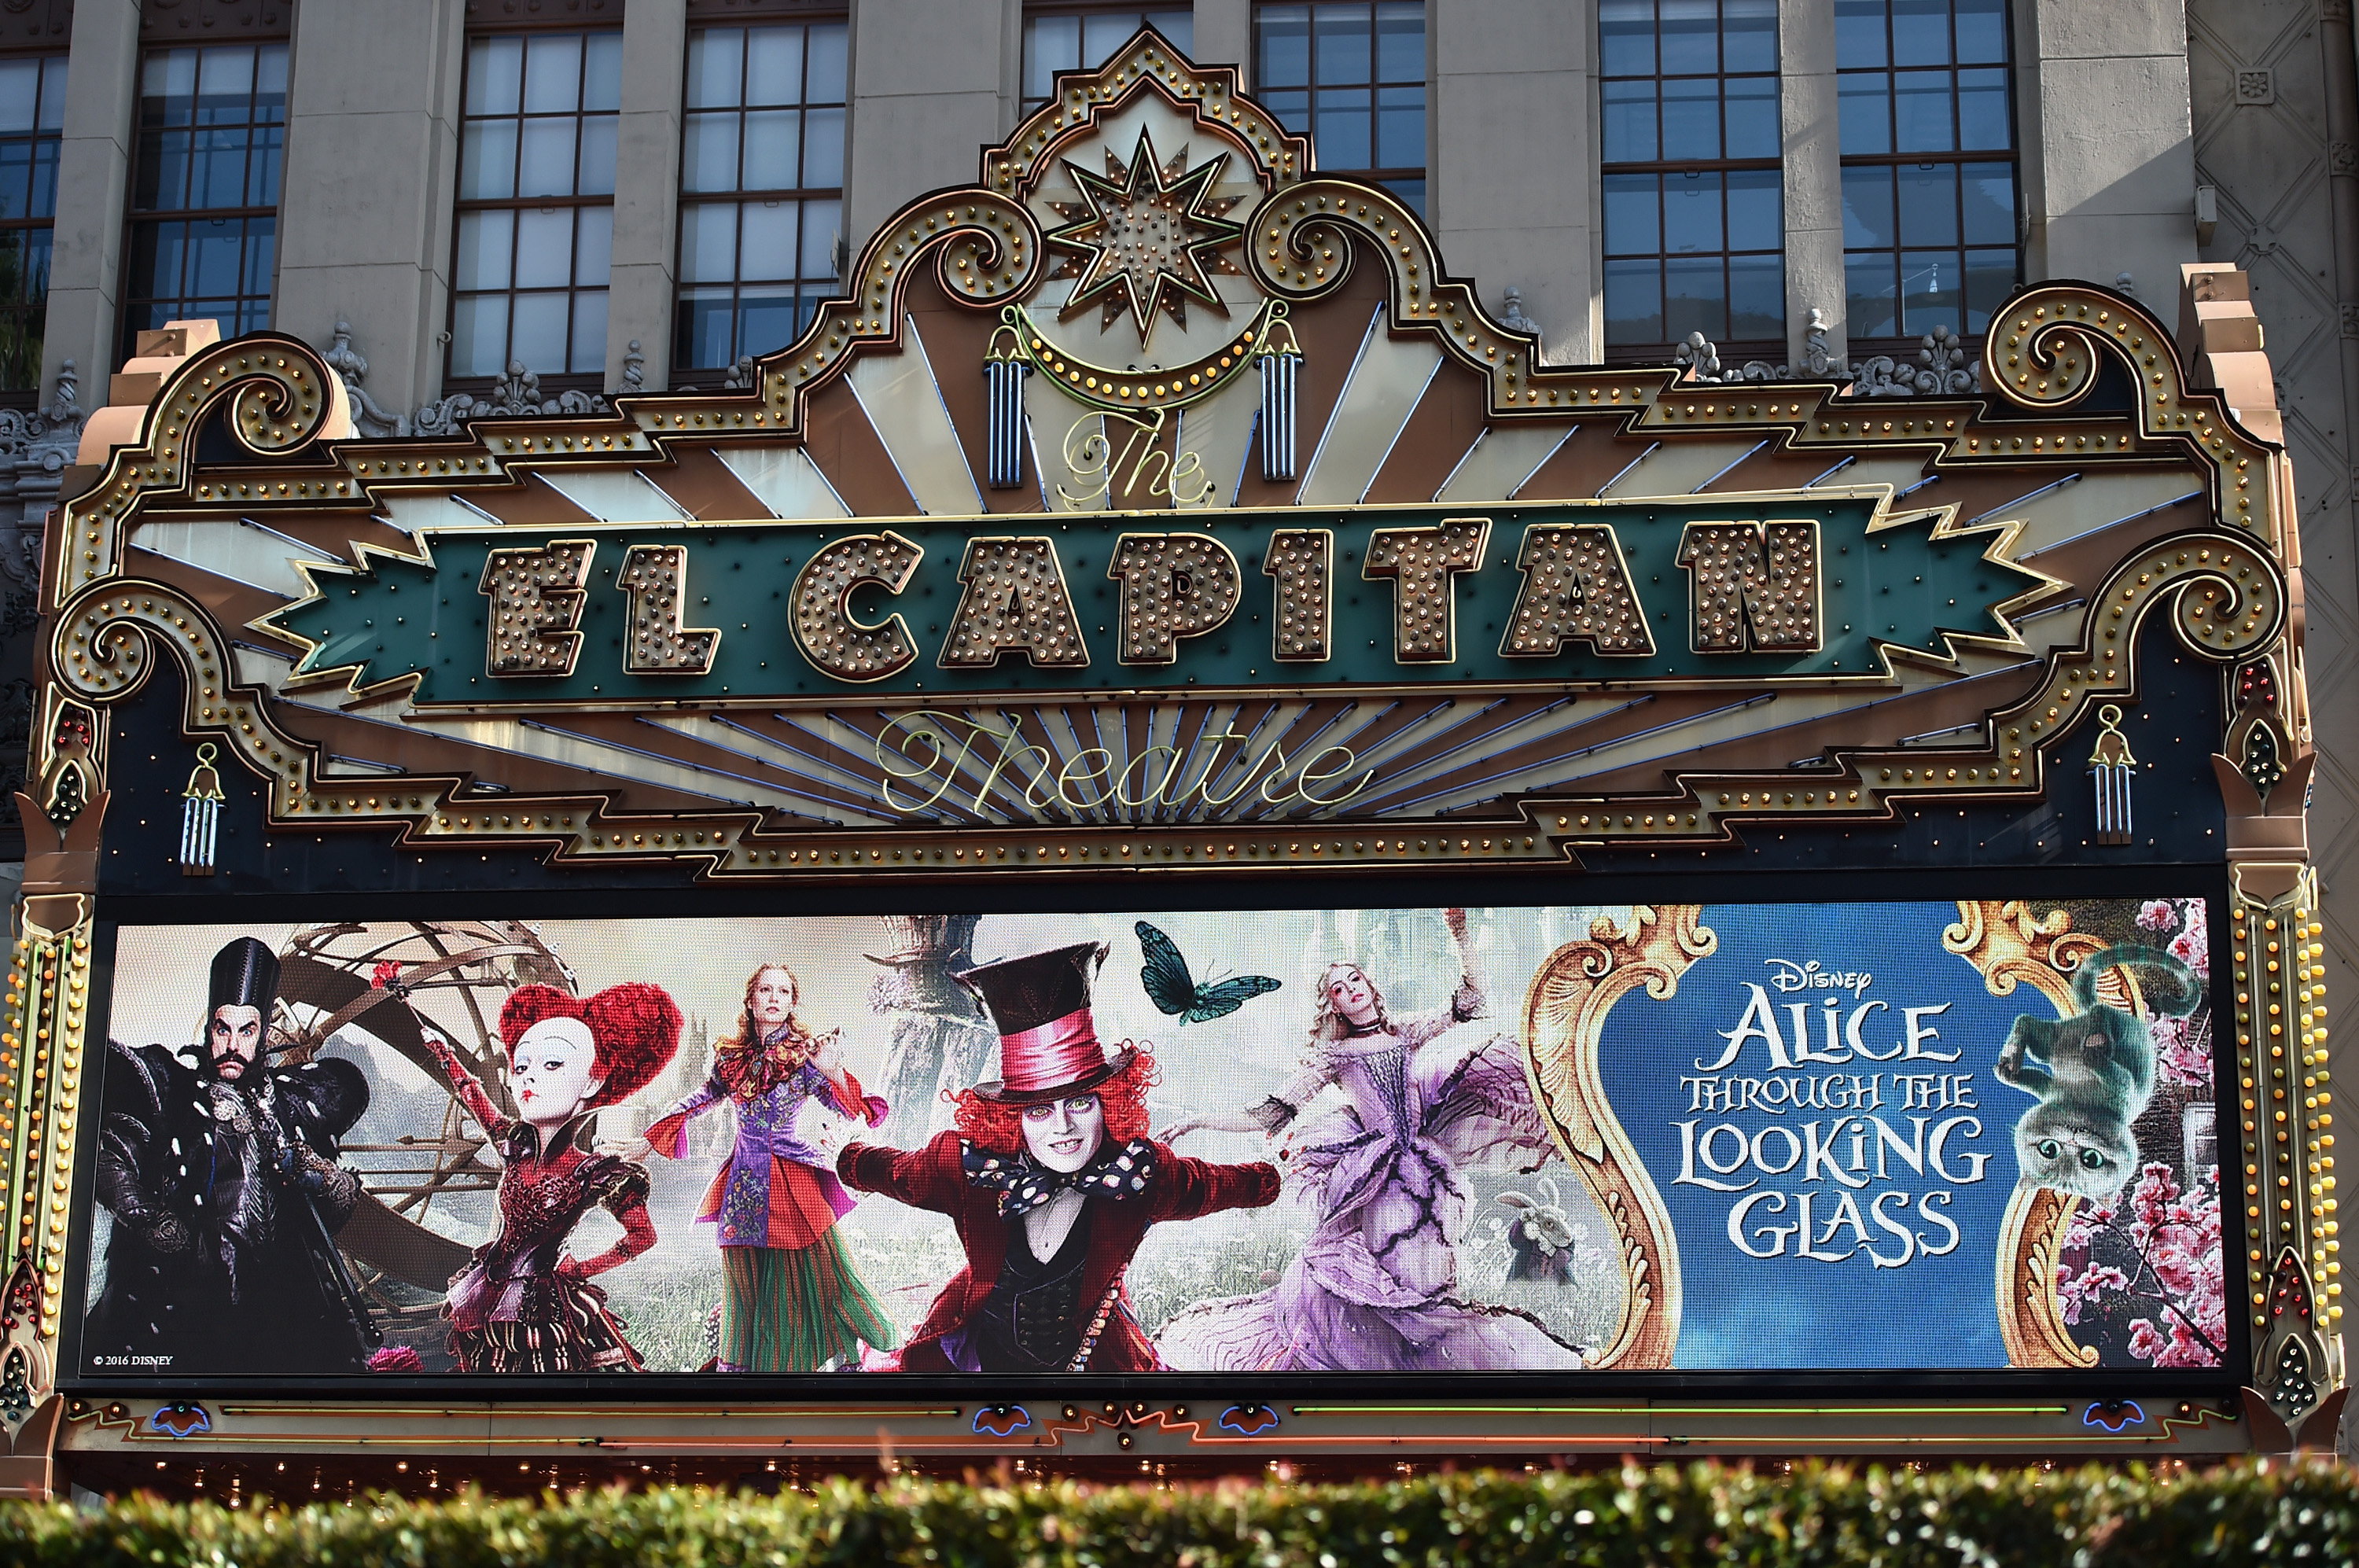 HOLLYWOOD, CA - MAY 23: A view of the atmosphere at Disneys 'Alice Through the Looking Glass' premiere with the cast of the film, which included Johnny Depp, Anne Hathaway, Mia Wasikowska and Sacha Baron Cohen at the El Capitan Theatre on May 23, 2016 in Hollywood, California. (Photo by Alberto E. Rodriguez/Getty Images for Disney)